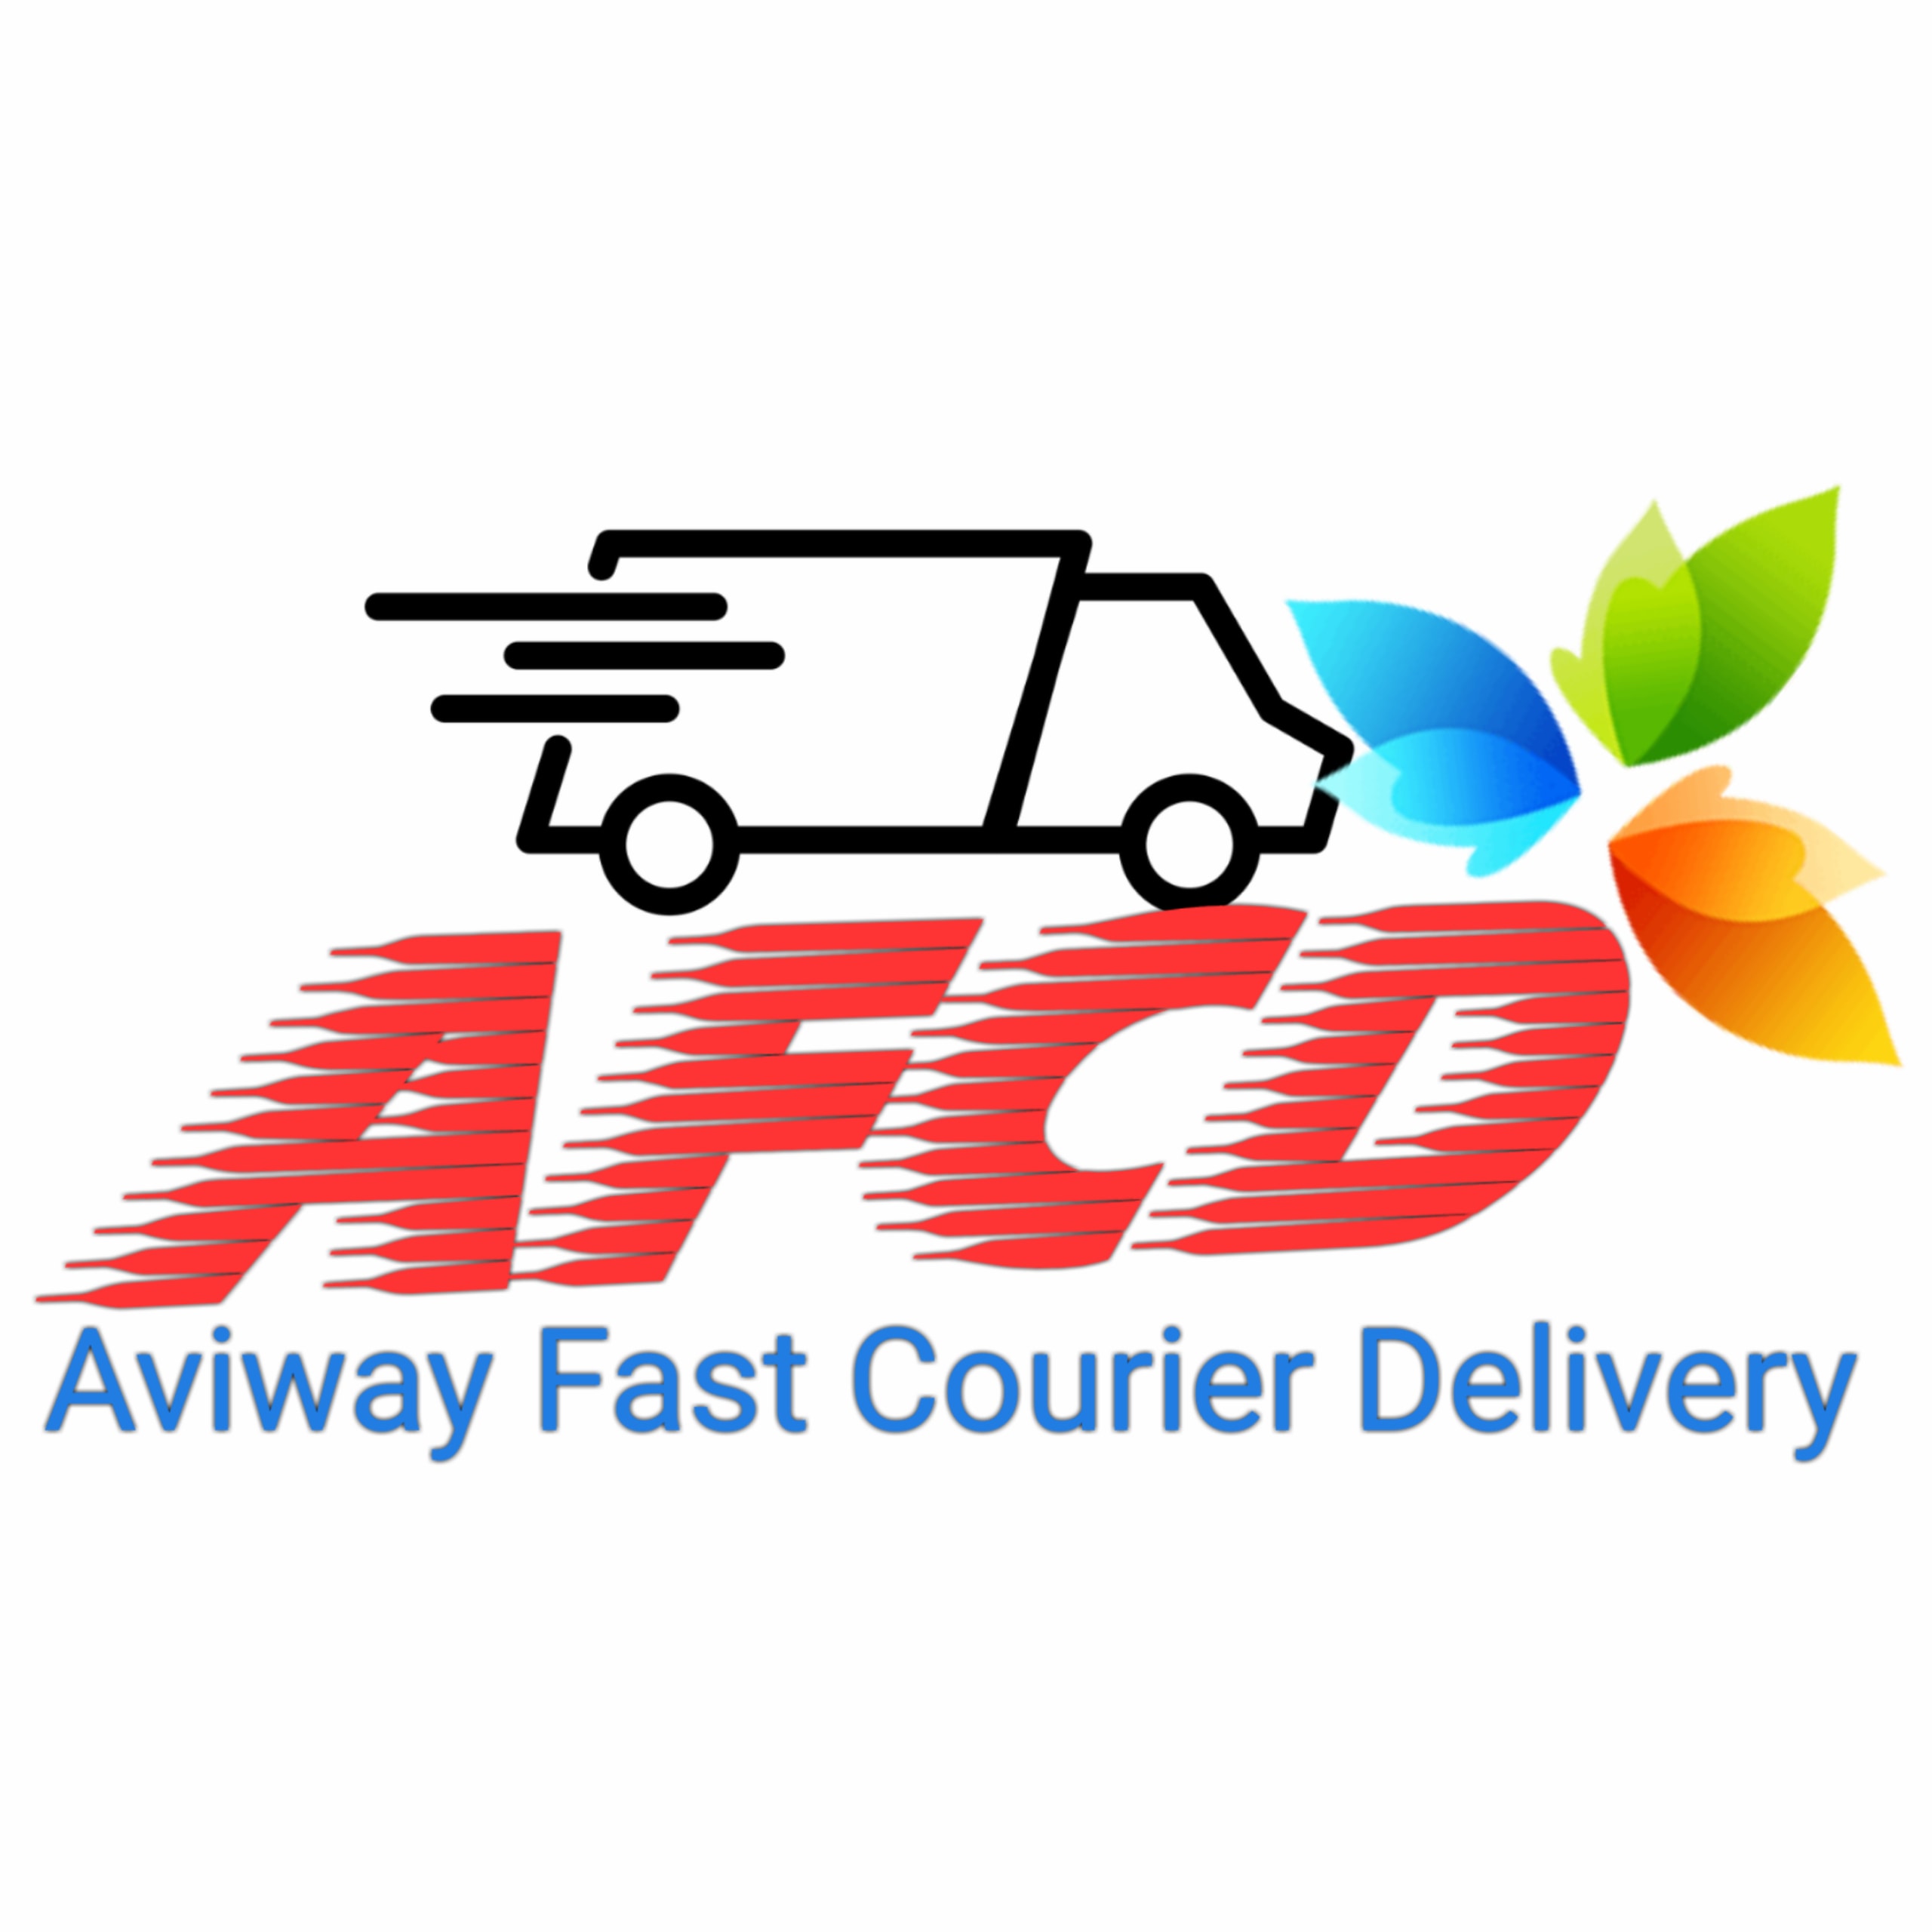 Aviway Fast Courier Delivery